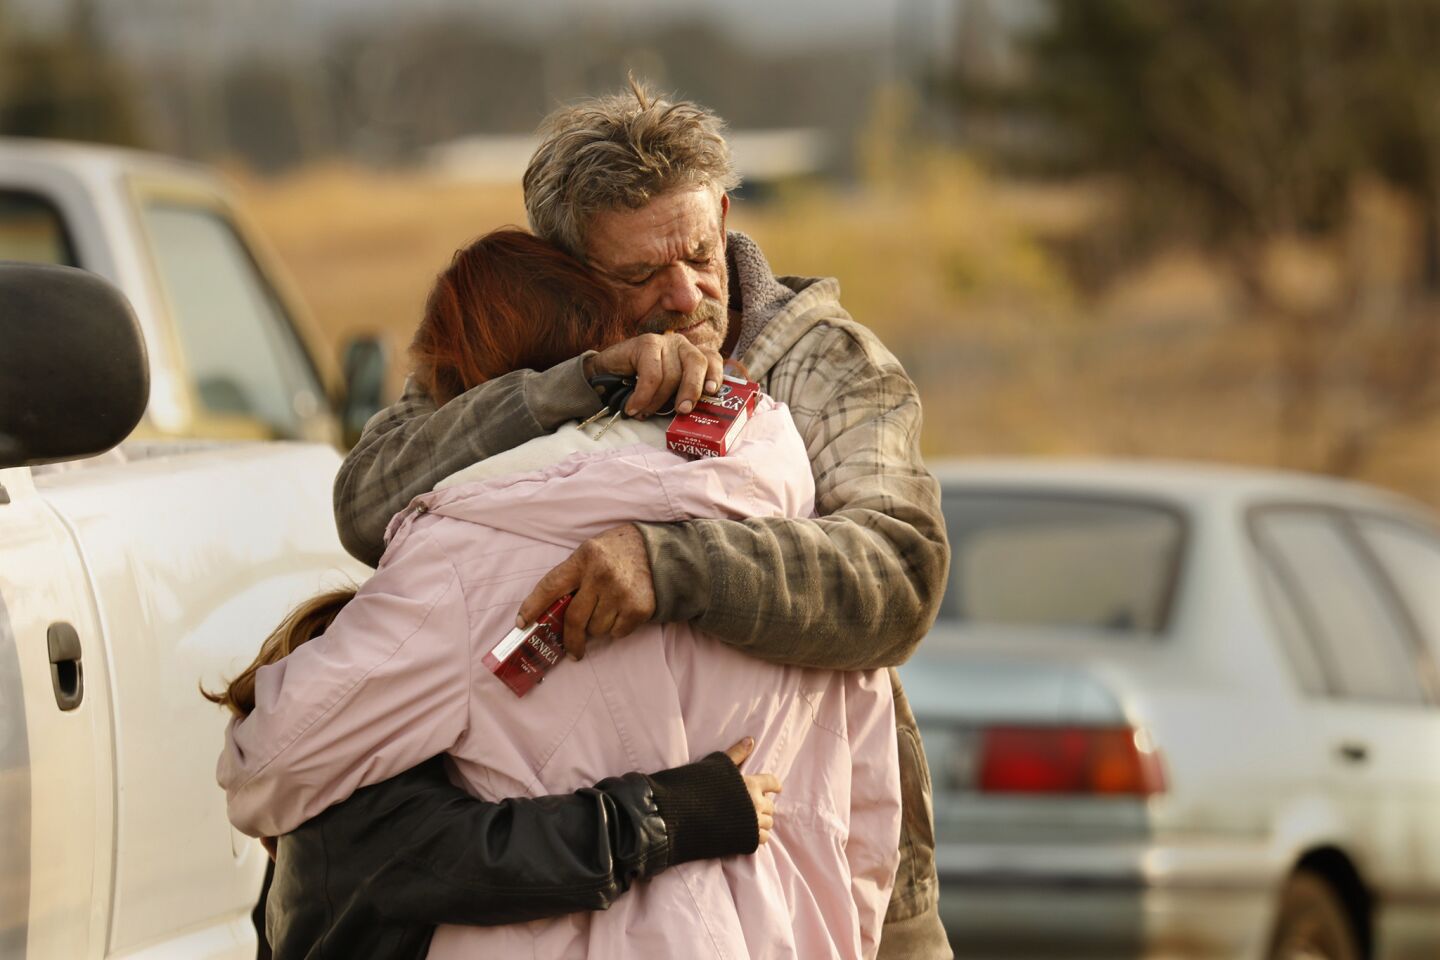 David Neeley hugs his ex-wife, Jeanne Neely, and their daughter, Faith Neeley, 10, in a parking lot in Oroville, where they are staying amid the Camp fire.